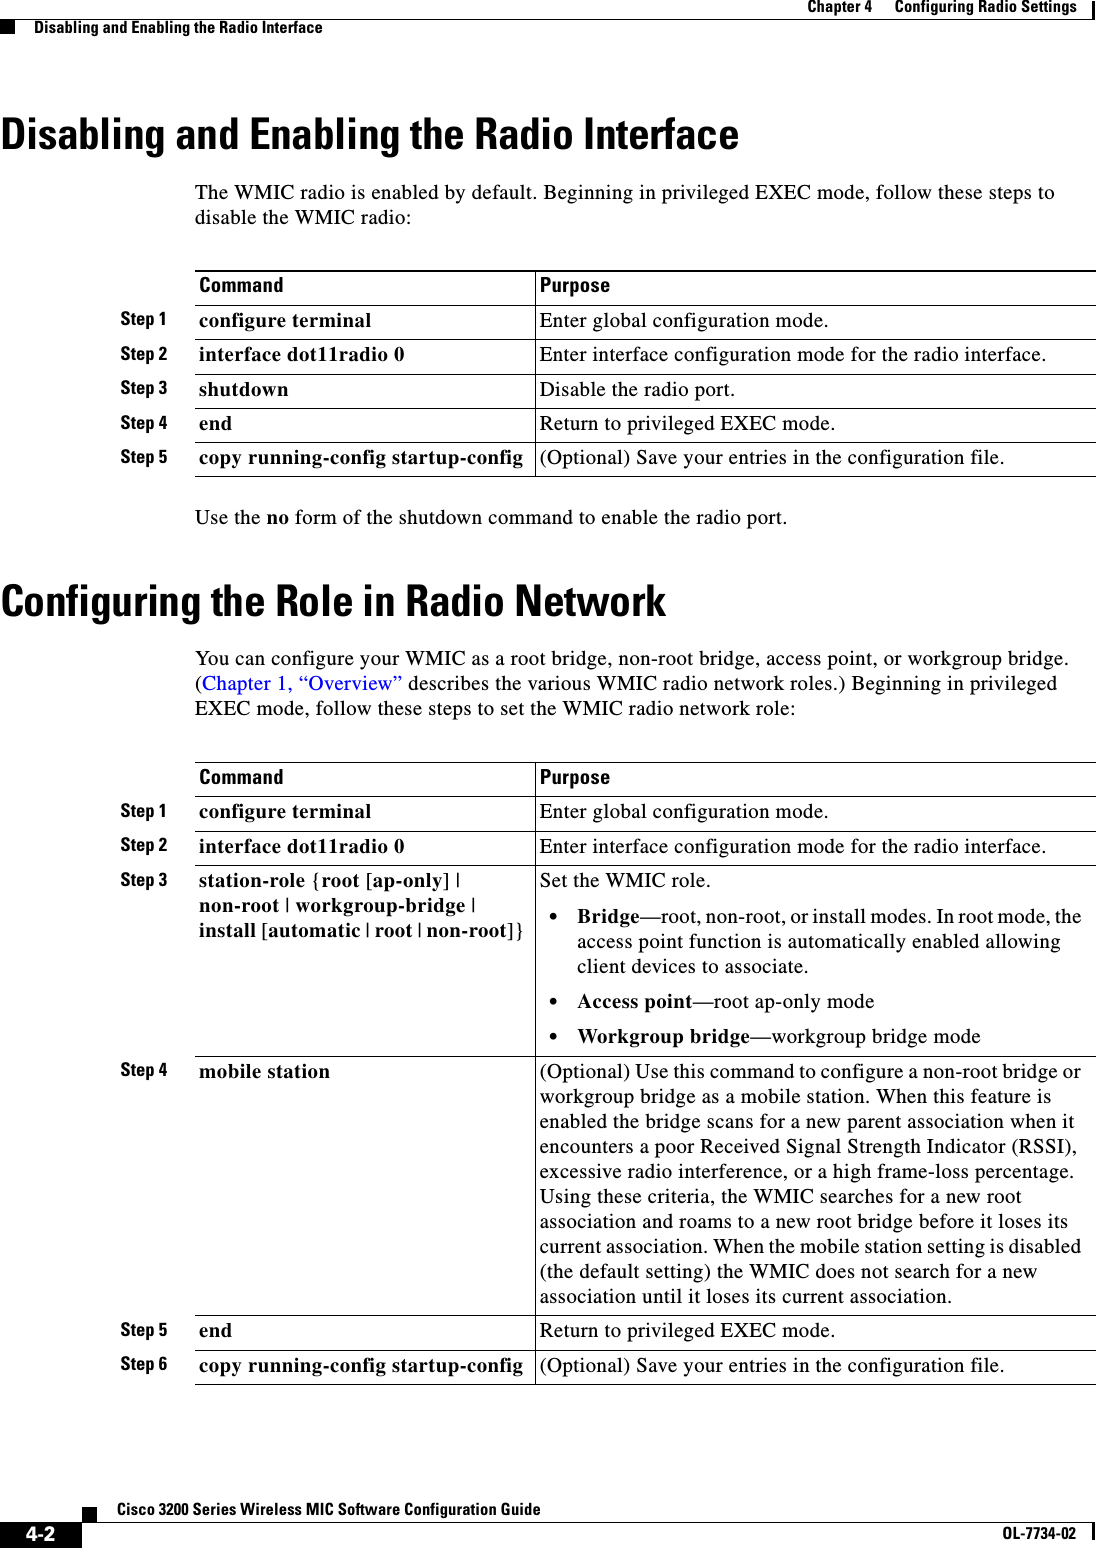 4-2Cisco 3200 Series Wireless MIC Software Configuration GuideOL-7734-02Chapter 4      Configuring Radio SettingsDisabling and Enabling the Radio InterfaceDisabling and Enabling the Radio InterfaceThe WMIC radio is enabled by default. Beginning in privileged EXEC mode, follow these steps to disable the WMIC radio:Use the no form of the shutdown command to enable the radio port. Configuring the Role in Radio NetworkYou can configure your WMIC as a root bridge, non-root bridge, access point, or workgroup bridge. (Chapter 1, “Overview” describes the various WMIC radio network roles.) Beginning in privileged EXEC mode, follow these steps to set the WMIC radio network role:Command PurposeStep 1 configure terminal Enter global configuration mode.Step 2 interface dot11radio 0 Enter interface configuration mode for the radio interface. Step 3 shutdown Disable the radio port.Step 4 end Return to privileged EXEC mode.Step 5 copy running-config startup-config (Optional) Save your entries in the configuration file.Command PurposeStep 1 configure terminal Enter global configuration mode.Step 2 interface dot11radio 0 Enter interface configuration mode for the radio interface. Step 3 station-role {root [ap-only] | non-root |workgroup-bridge |install [automatic |root |non-root]}Set the WMIC role.•Bridge—root, non-root, or install modes. In root mode, the access point function is automatically enabled allowing client devices to associate.•Access point—root ap-only mode•Workgroup bridge—workgroup bridge modeStep 4 mobile station (Optional) Use this command to configure a non-root bridge or workgroup bridge as a mobile station. When this feature is enabled the bridge scans for a new parent association when it encounters a poor Received Signal Strength Indicator (RSSI), excessive radio interference, or a high frame-loss percentage. Using these criteria, the WMIC searches for a new root association and roams to a new root bridge before it loses its current association. When the mobile station setting is disabled (the default setting) the WMIC does not search for a new association until it loses its current association.Step 5 end Return to privileged EXEC mode.Step 6 copy running-config startup-config (Optional) Save your entries in the configuration file.